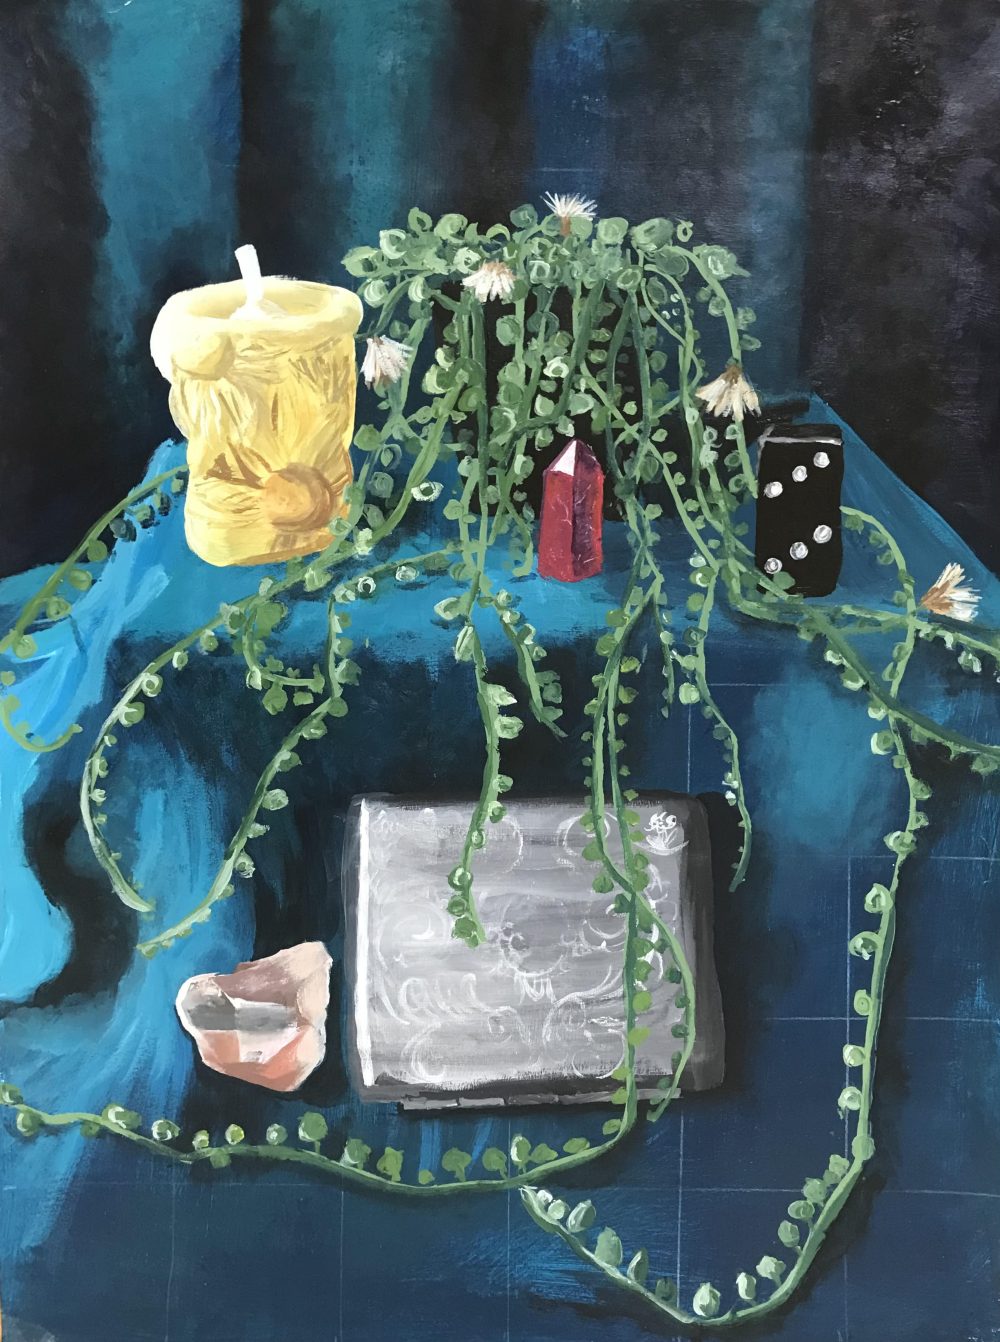 A still life acrylic painting with a dark teal background representing drapery. Central to the image is an altar with a bright yellow candle on the left with carved flowers, in the center is a string of pearls plant whose tendrils lay over the entirety of the alter. In front of the plant is a small pink prism stone. To the right of the plant is a number 6 domino piece. The bottom of the altar features an antique silver cigarette case, to the left of the cigarette case is citrine stone.